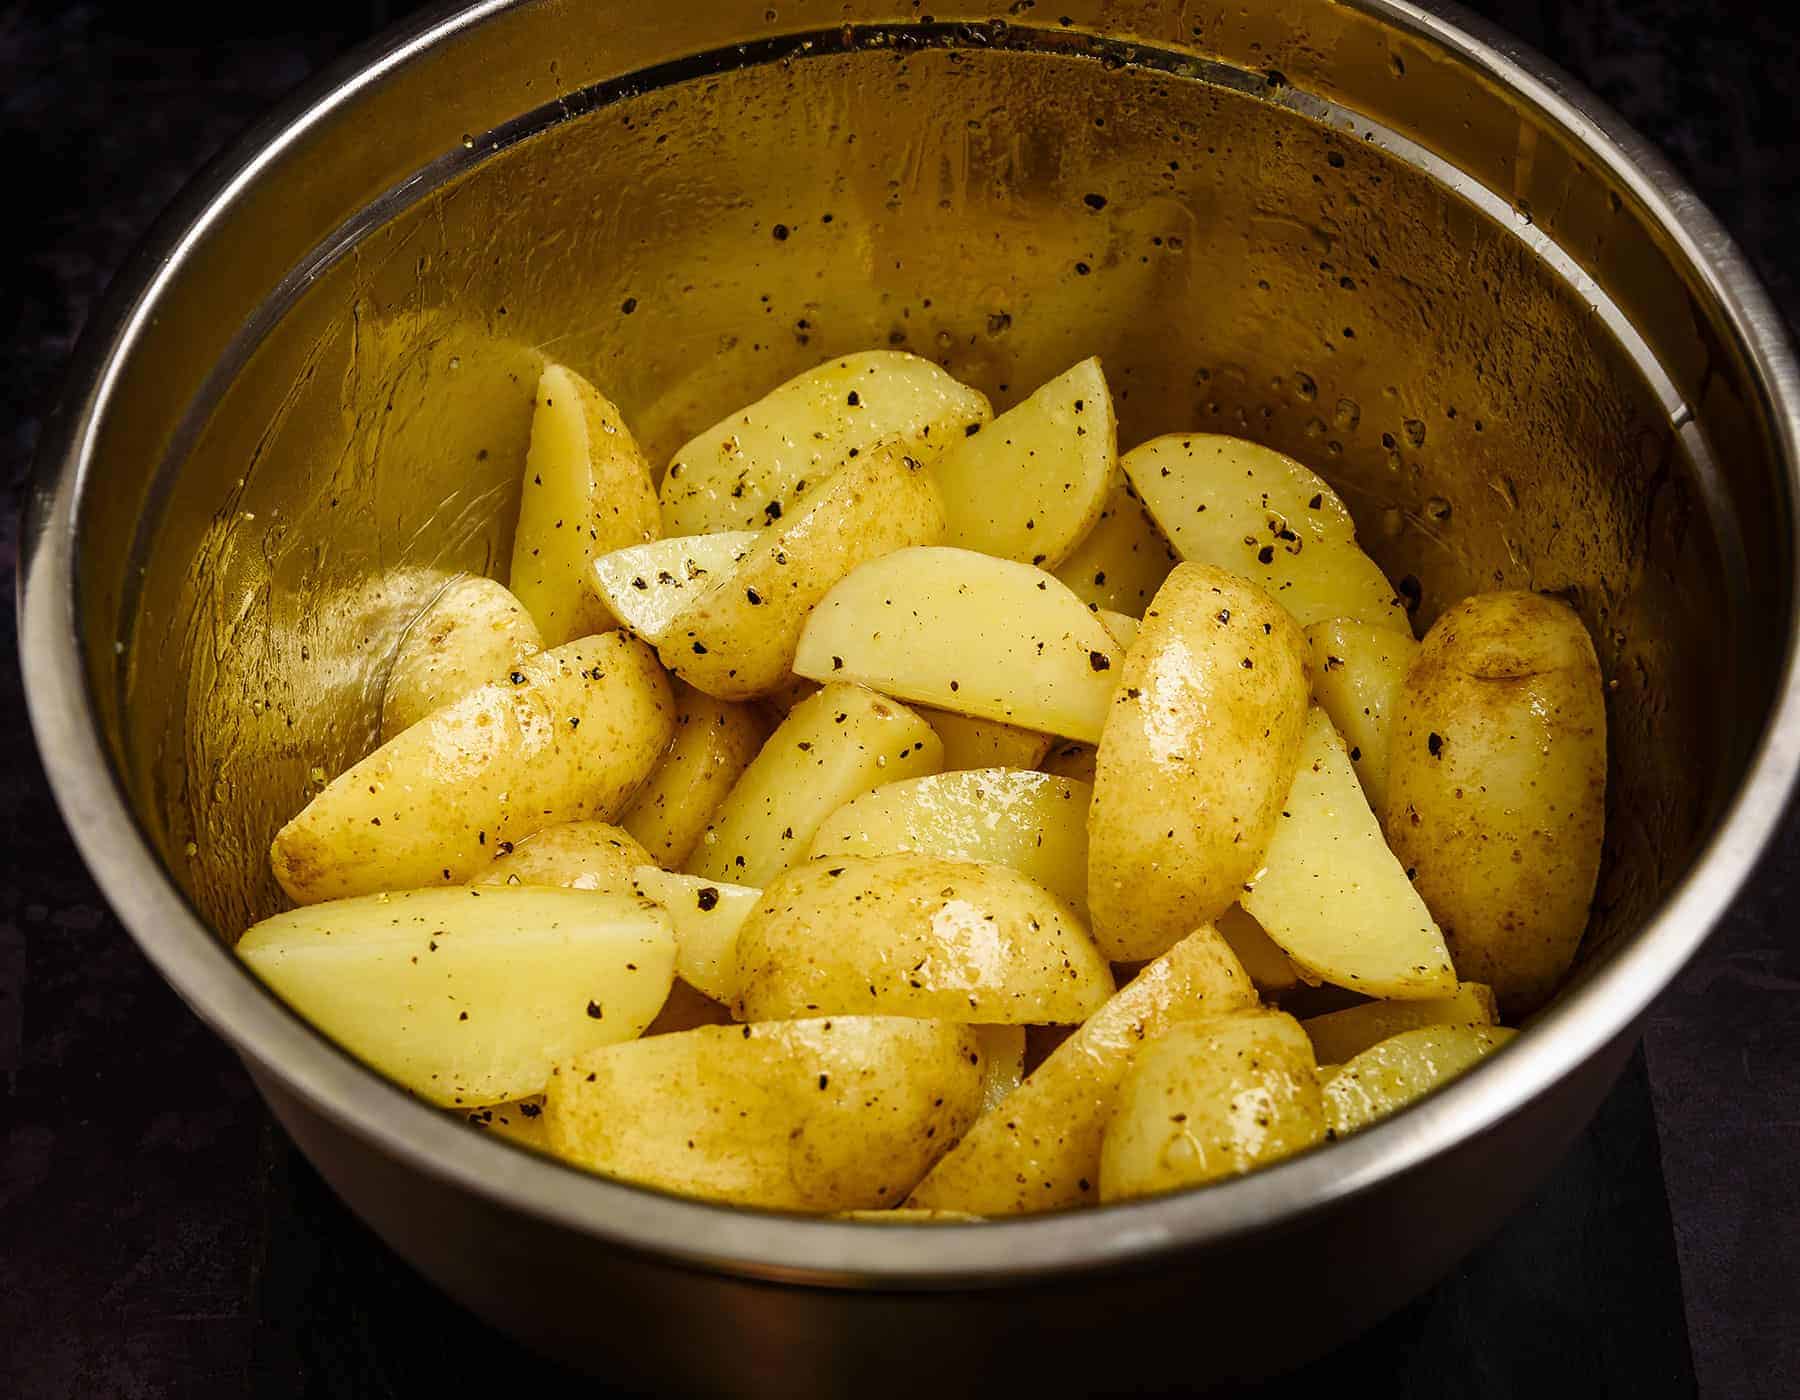 Potato wedges tossed in salt and pepper mixture